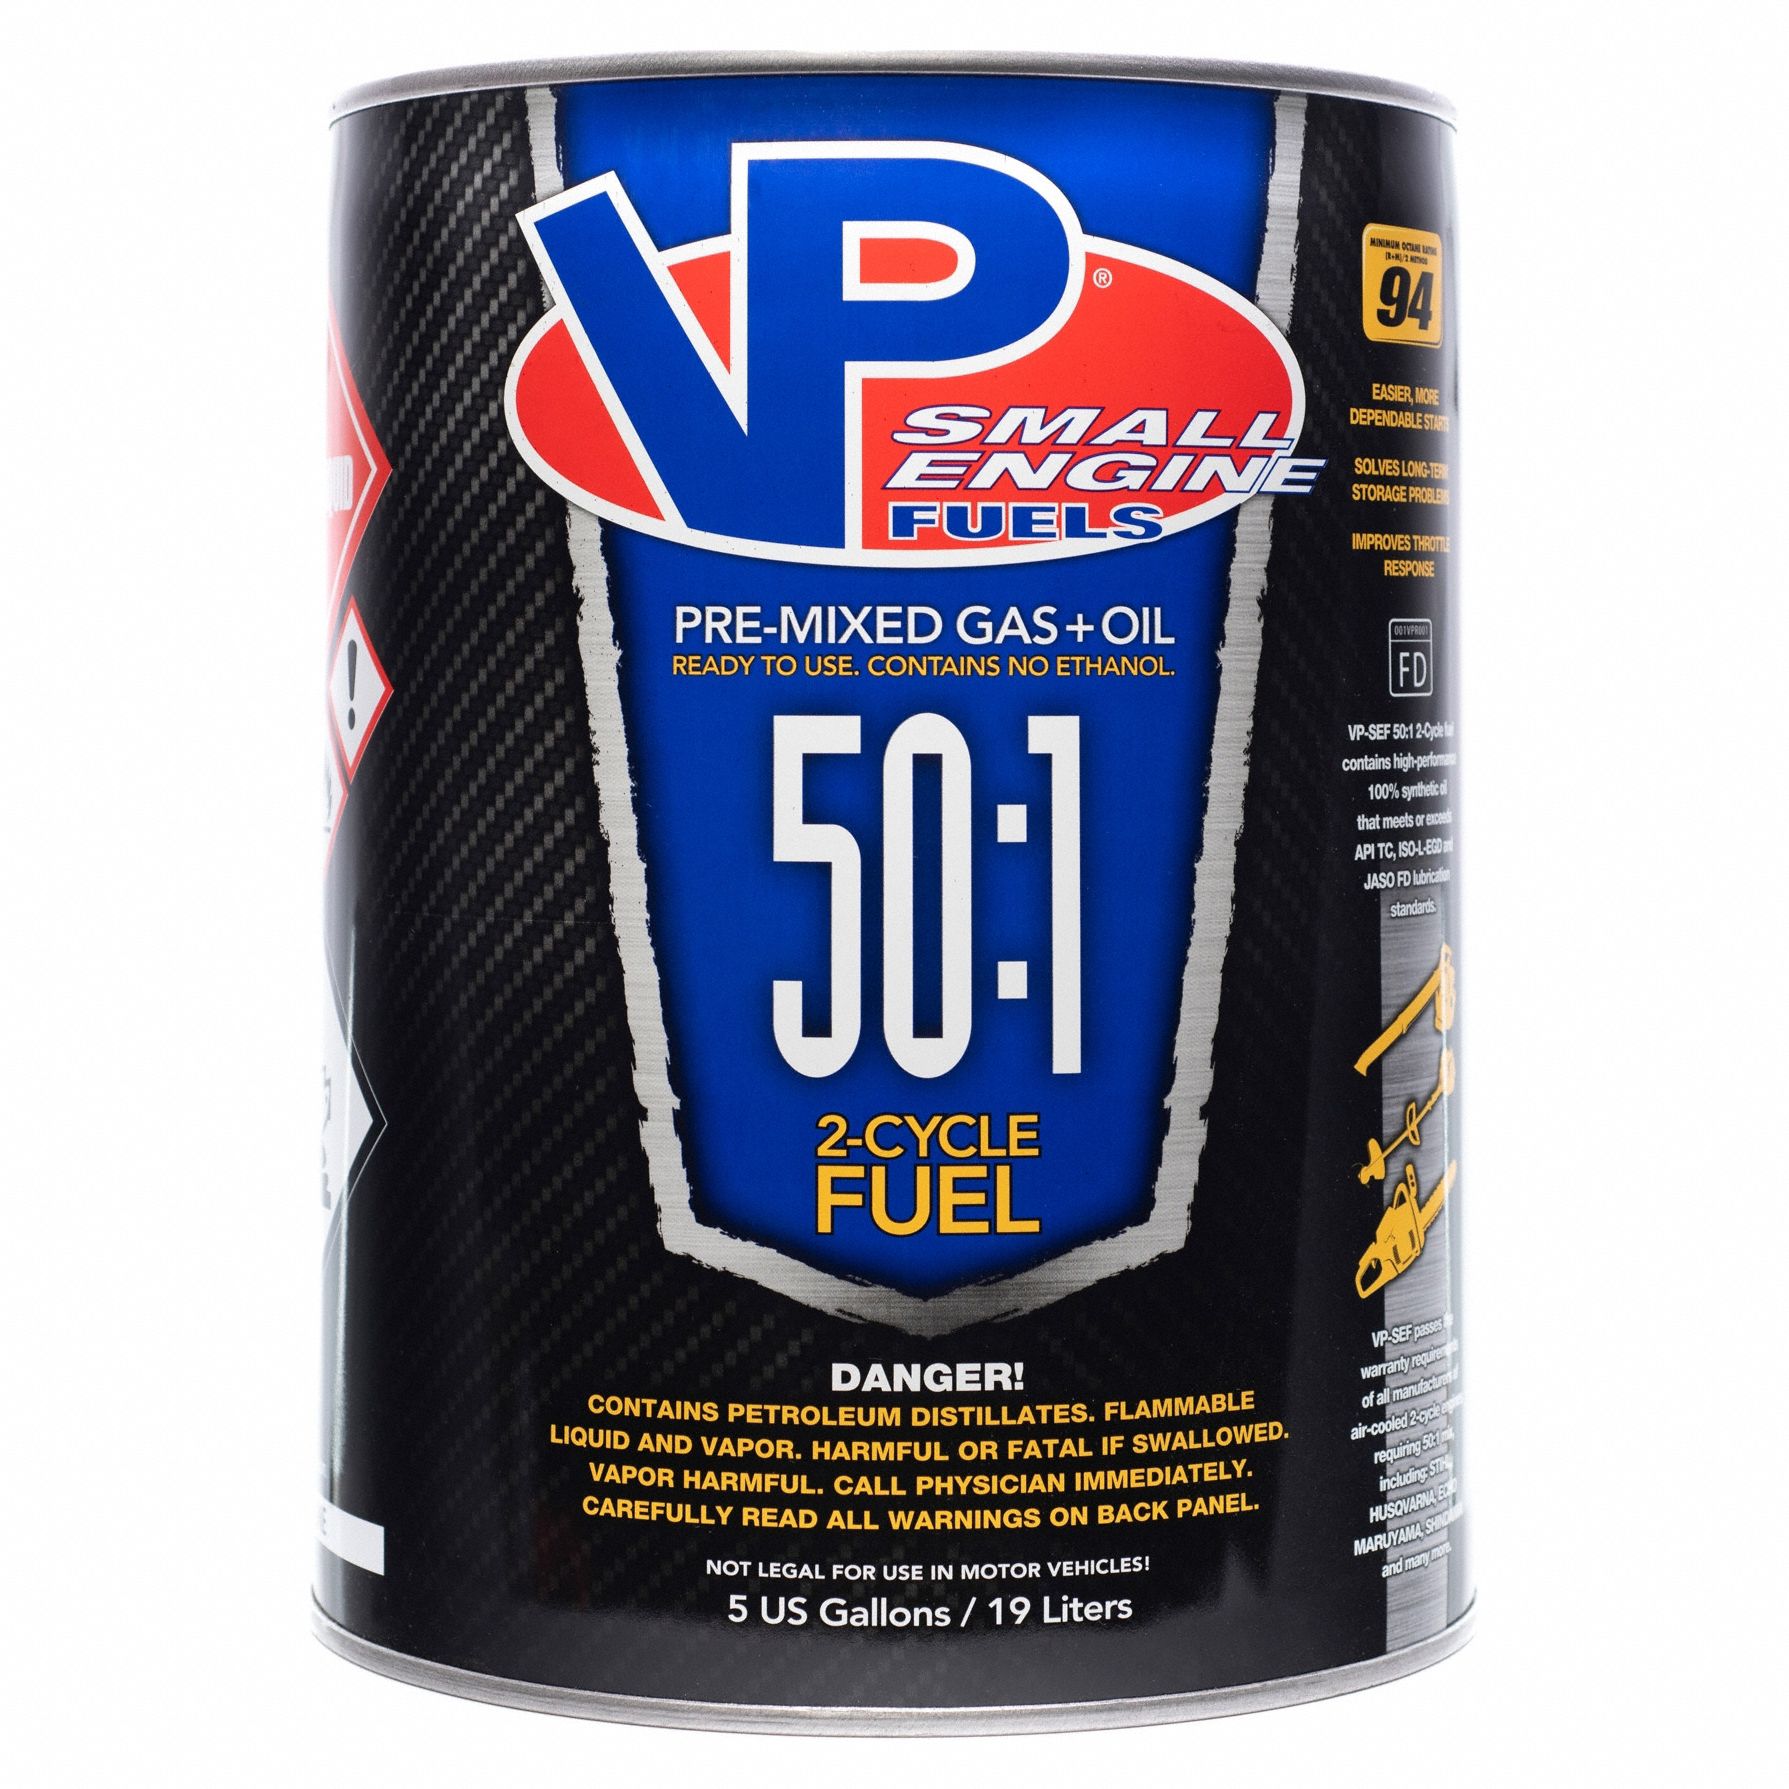 Small Engine Fuel, 2 Cycle: 50:1, 5 gal Container Size, Pail, 2-Cycle